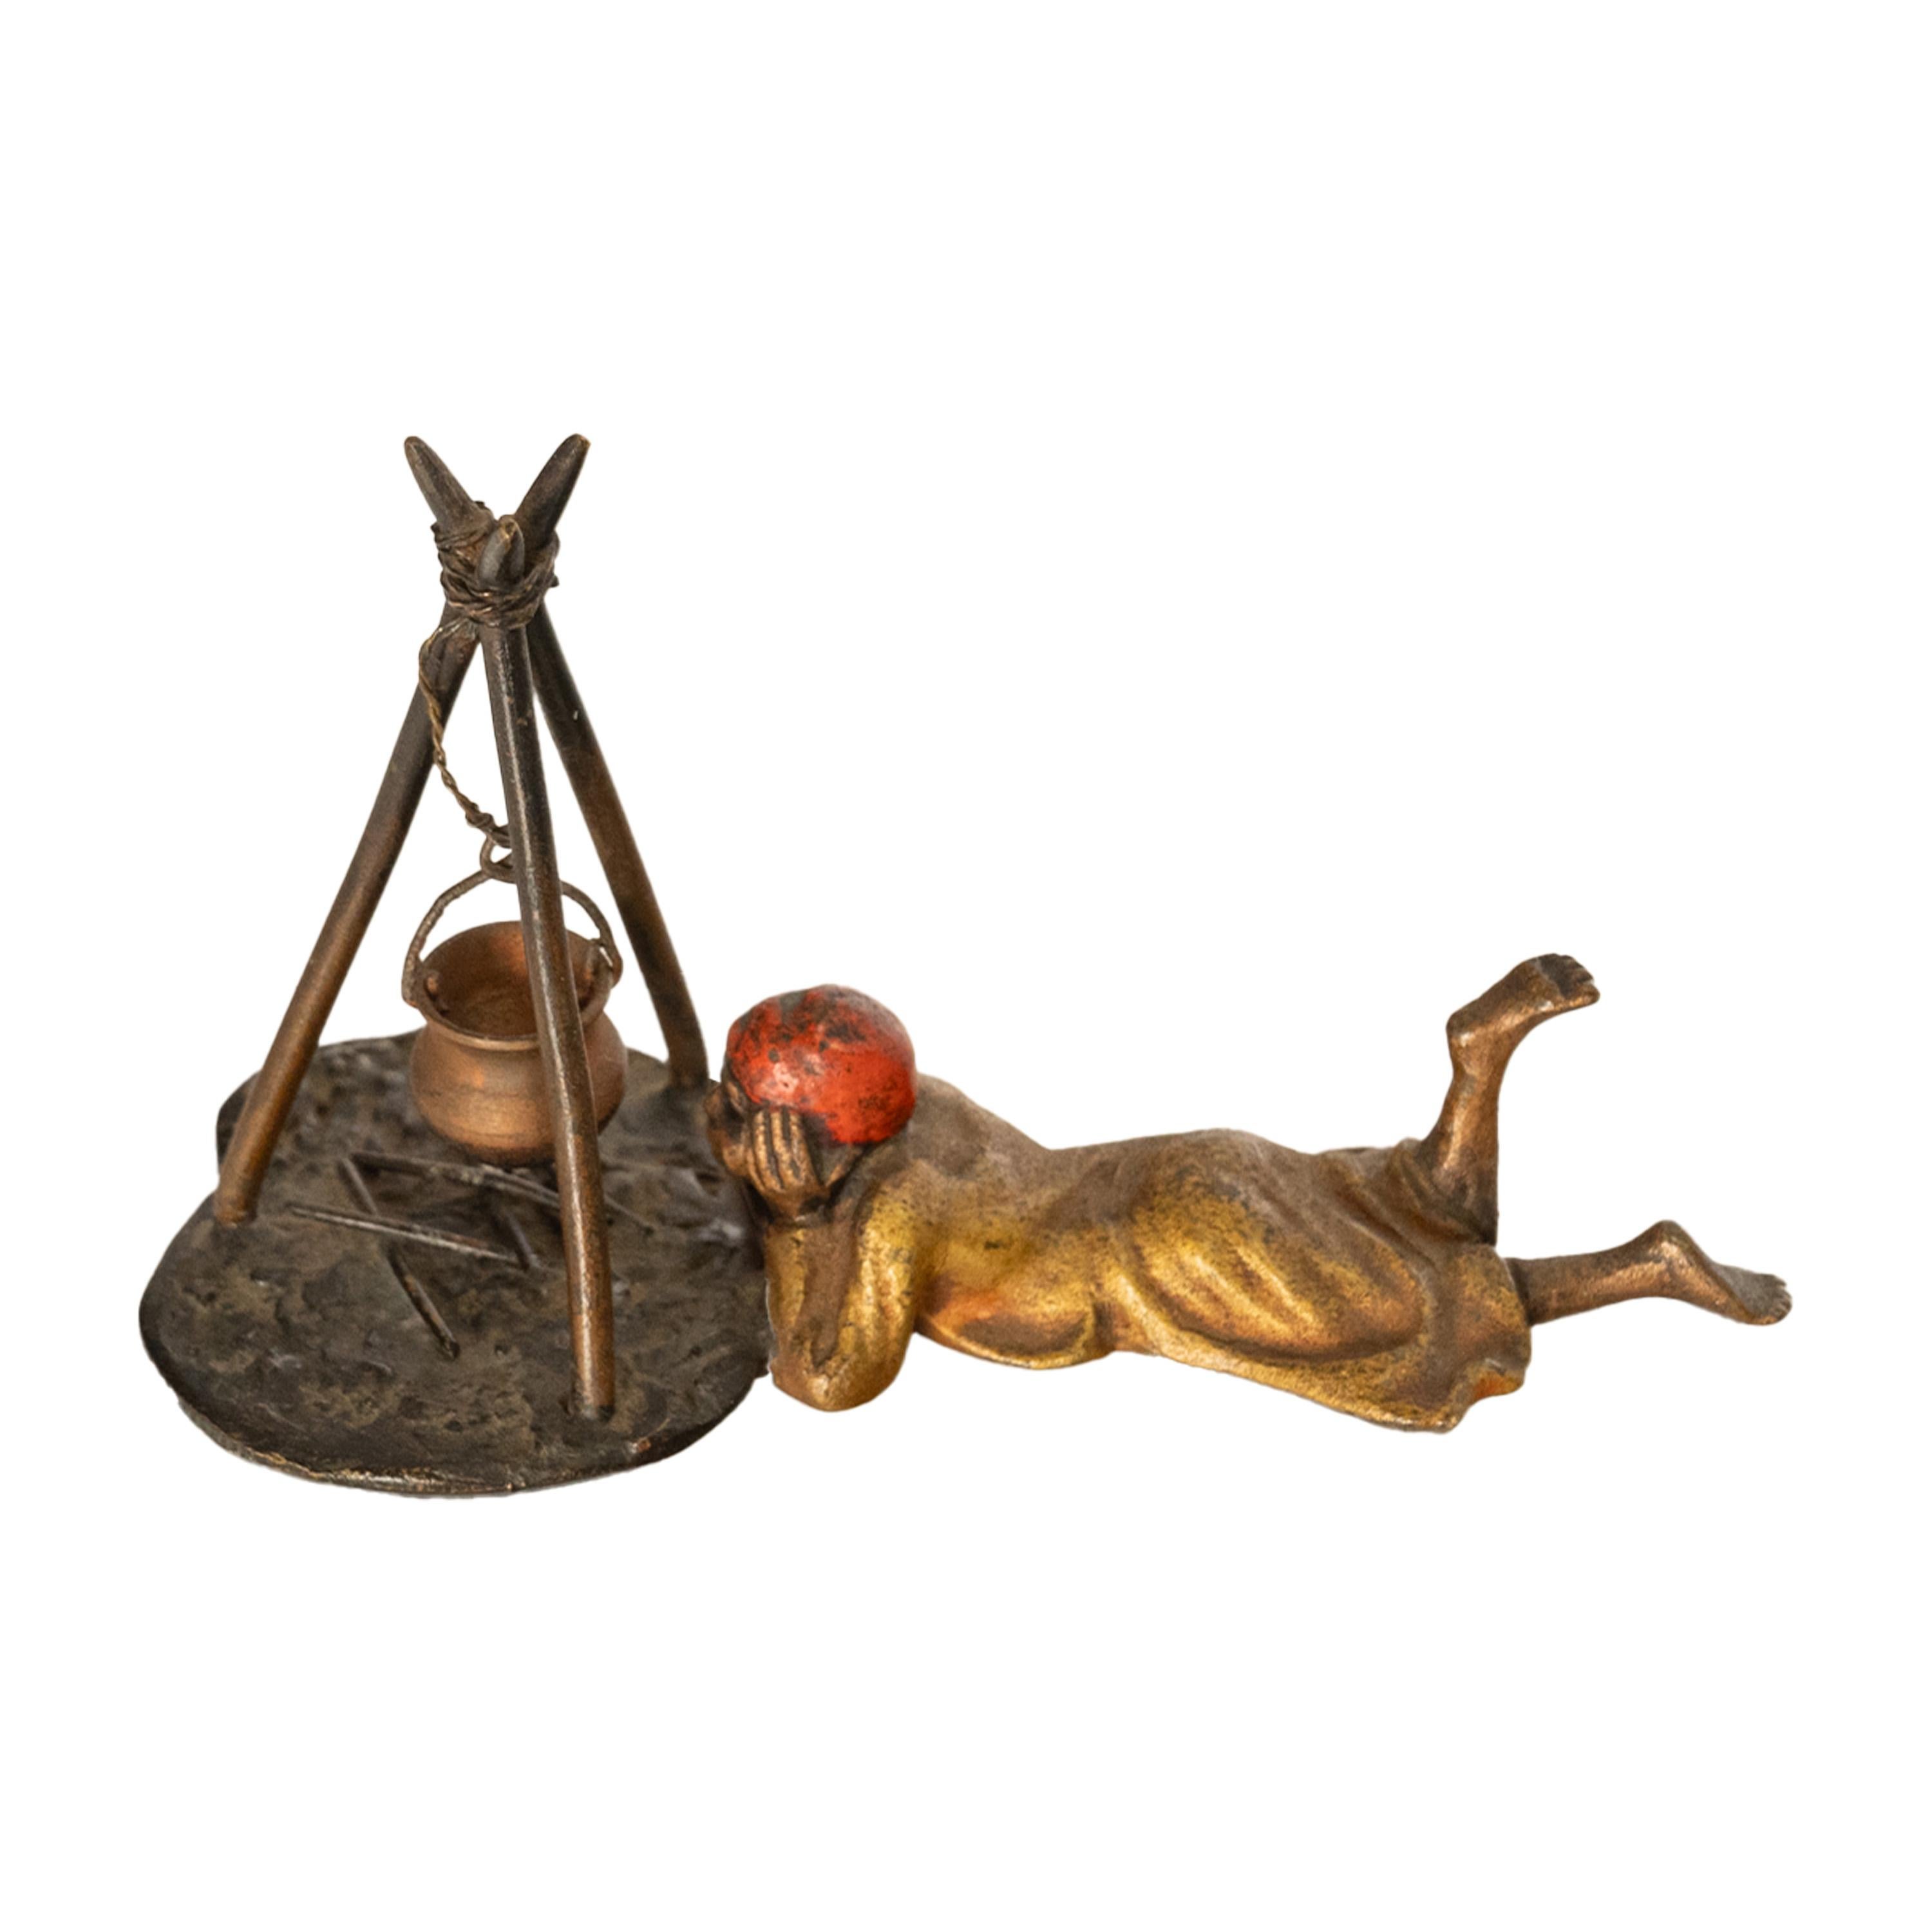 A charming and whimsical antique cold painted bronze in the Orientalist taste, attributed to Franz Bergmann, Austria circa 1910.
The bronze depicts a young Arab boy lying on his front and gazing at his campfire, above is a tripod support with a